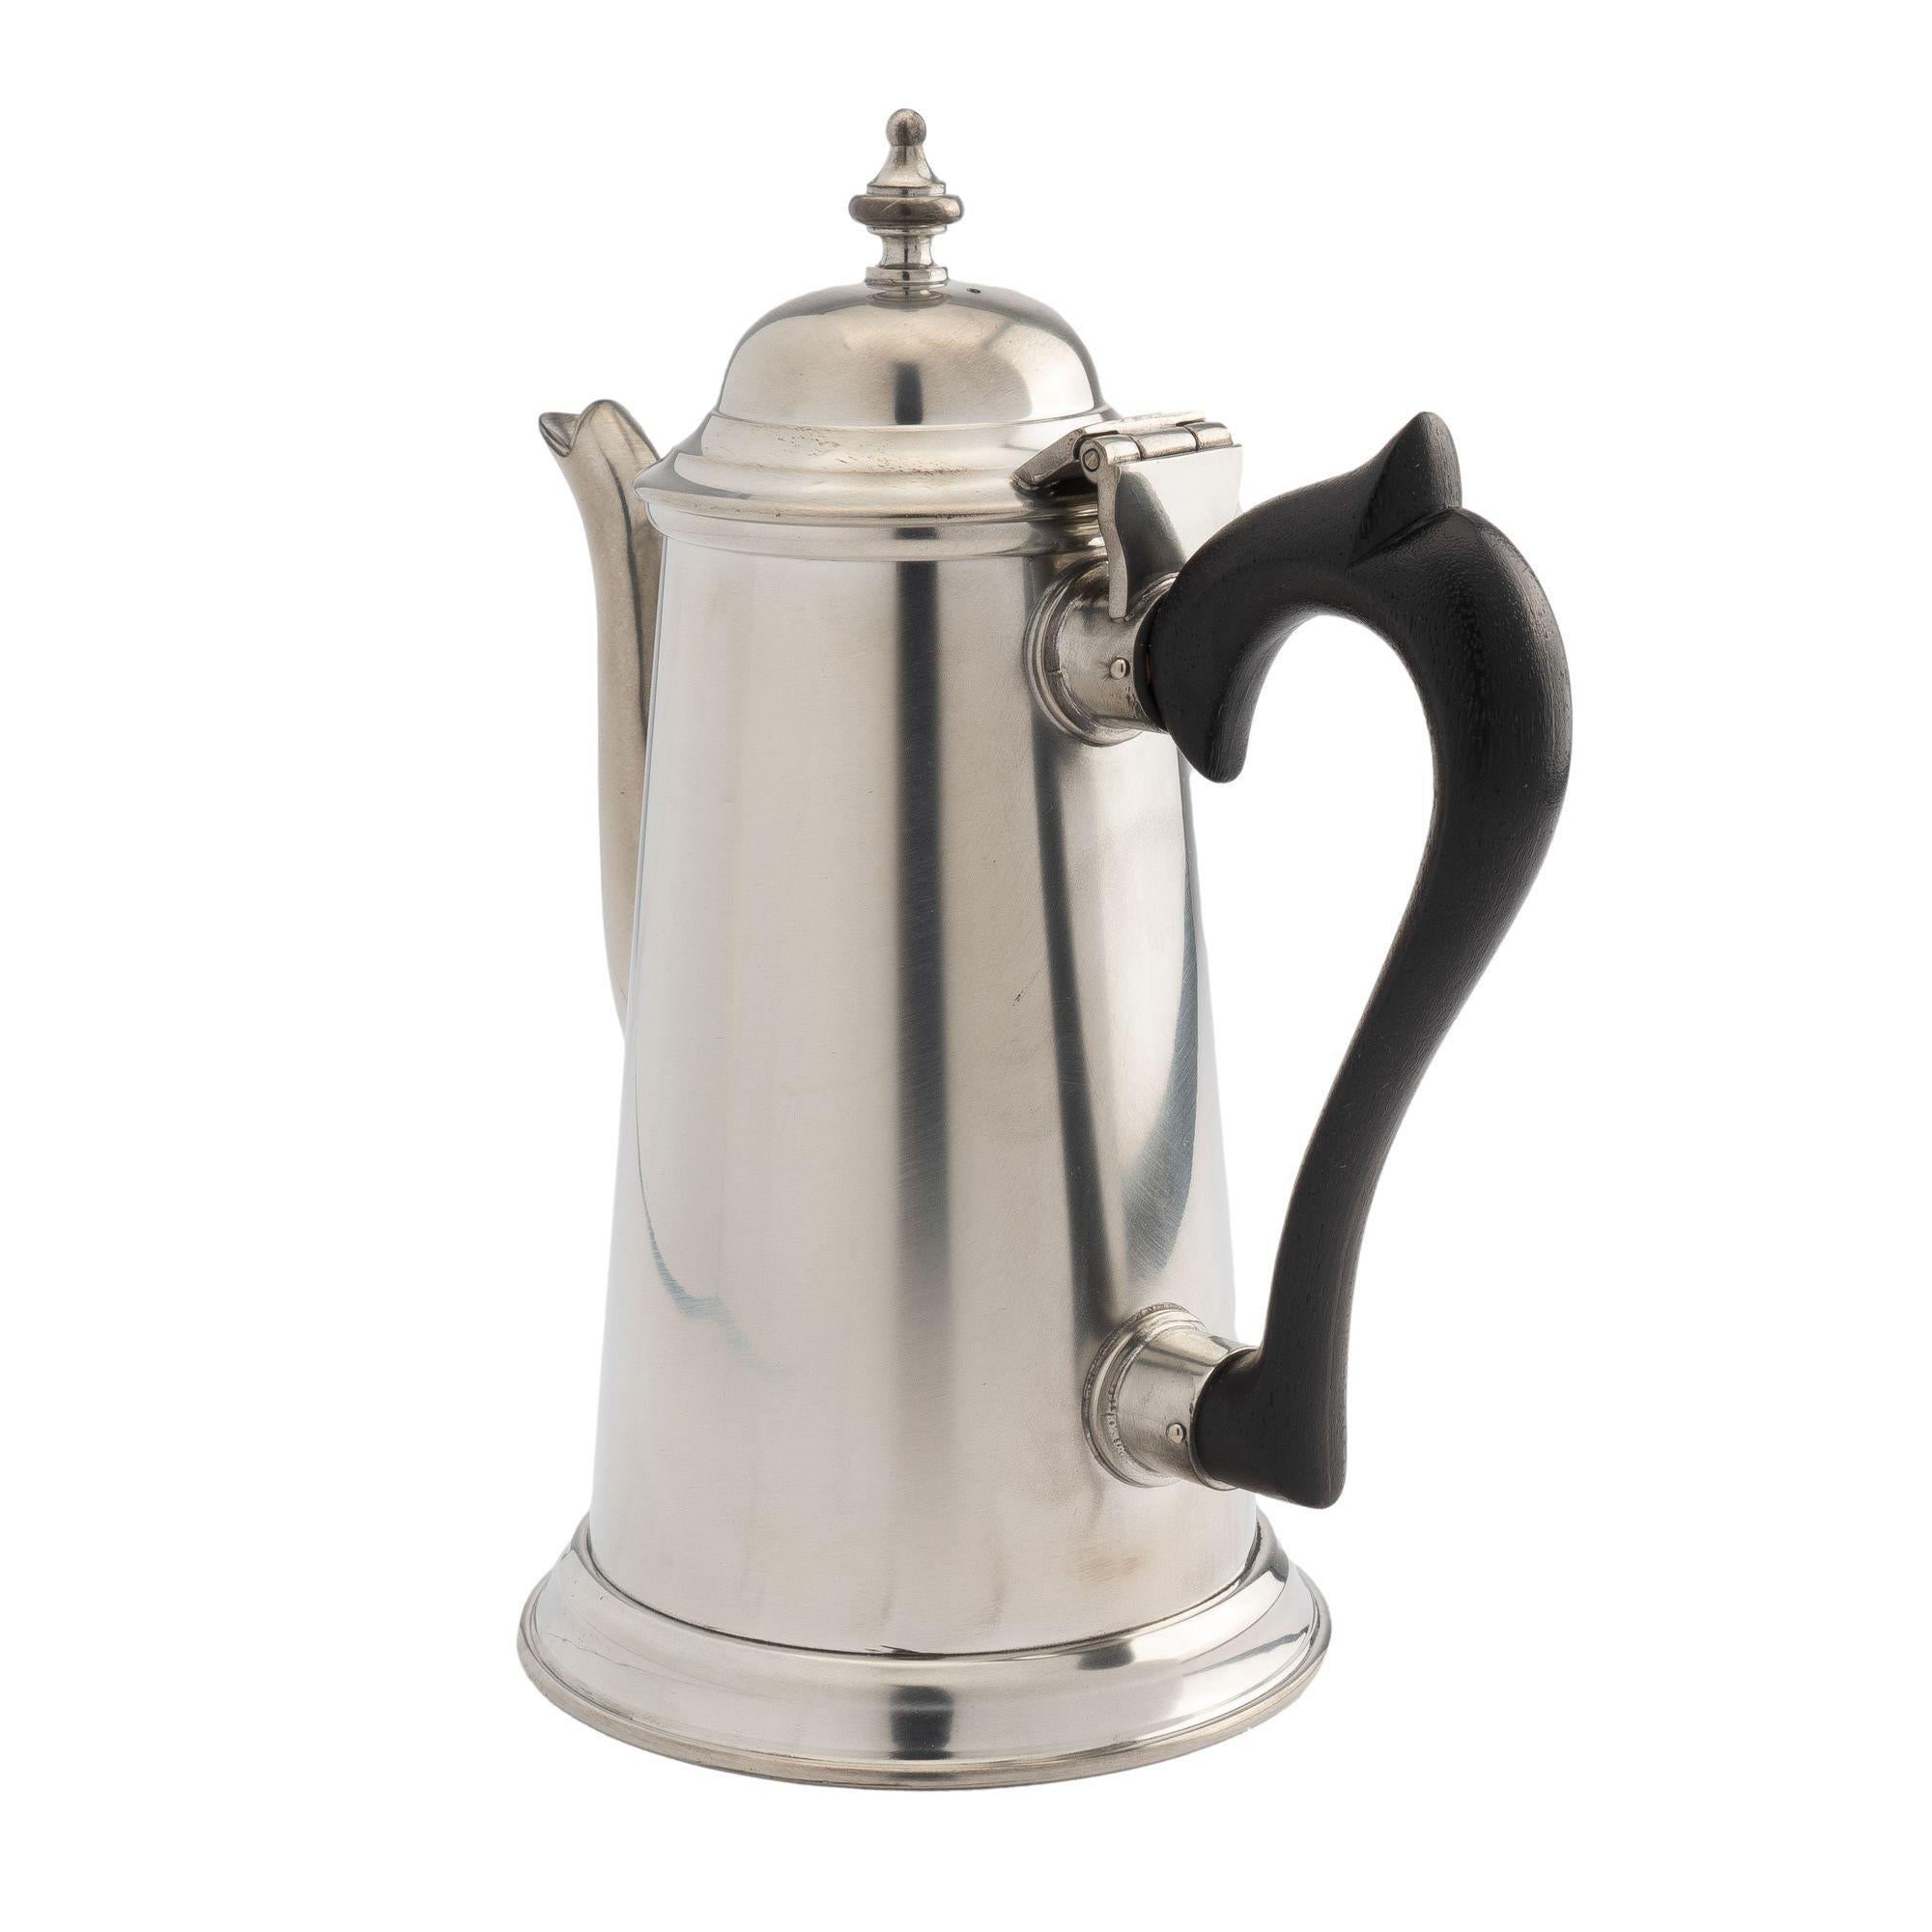 Academic Revival lighthouse form pewter coffee pot with hinged lid and carved wooden handle. Maker's stamp on the underside.
American, Baltimore, Maryland, 1979.